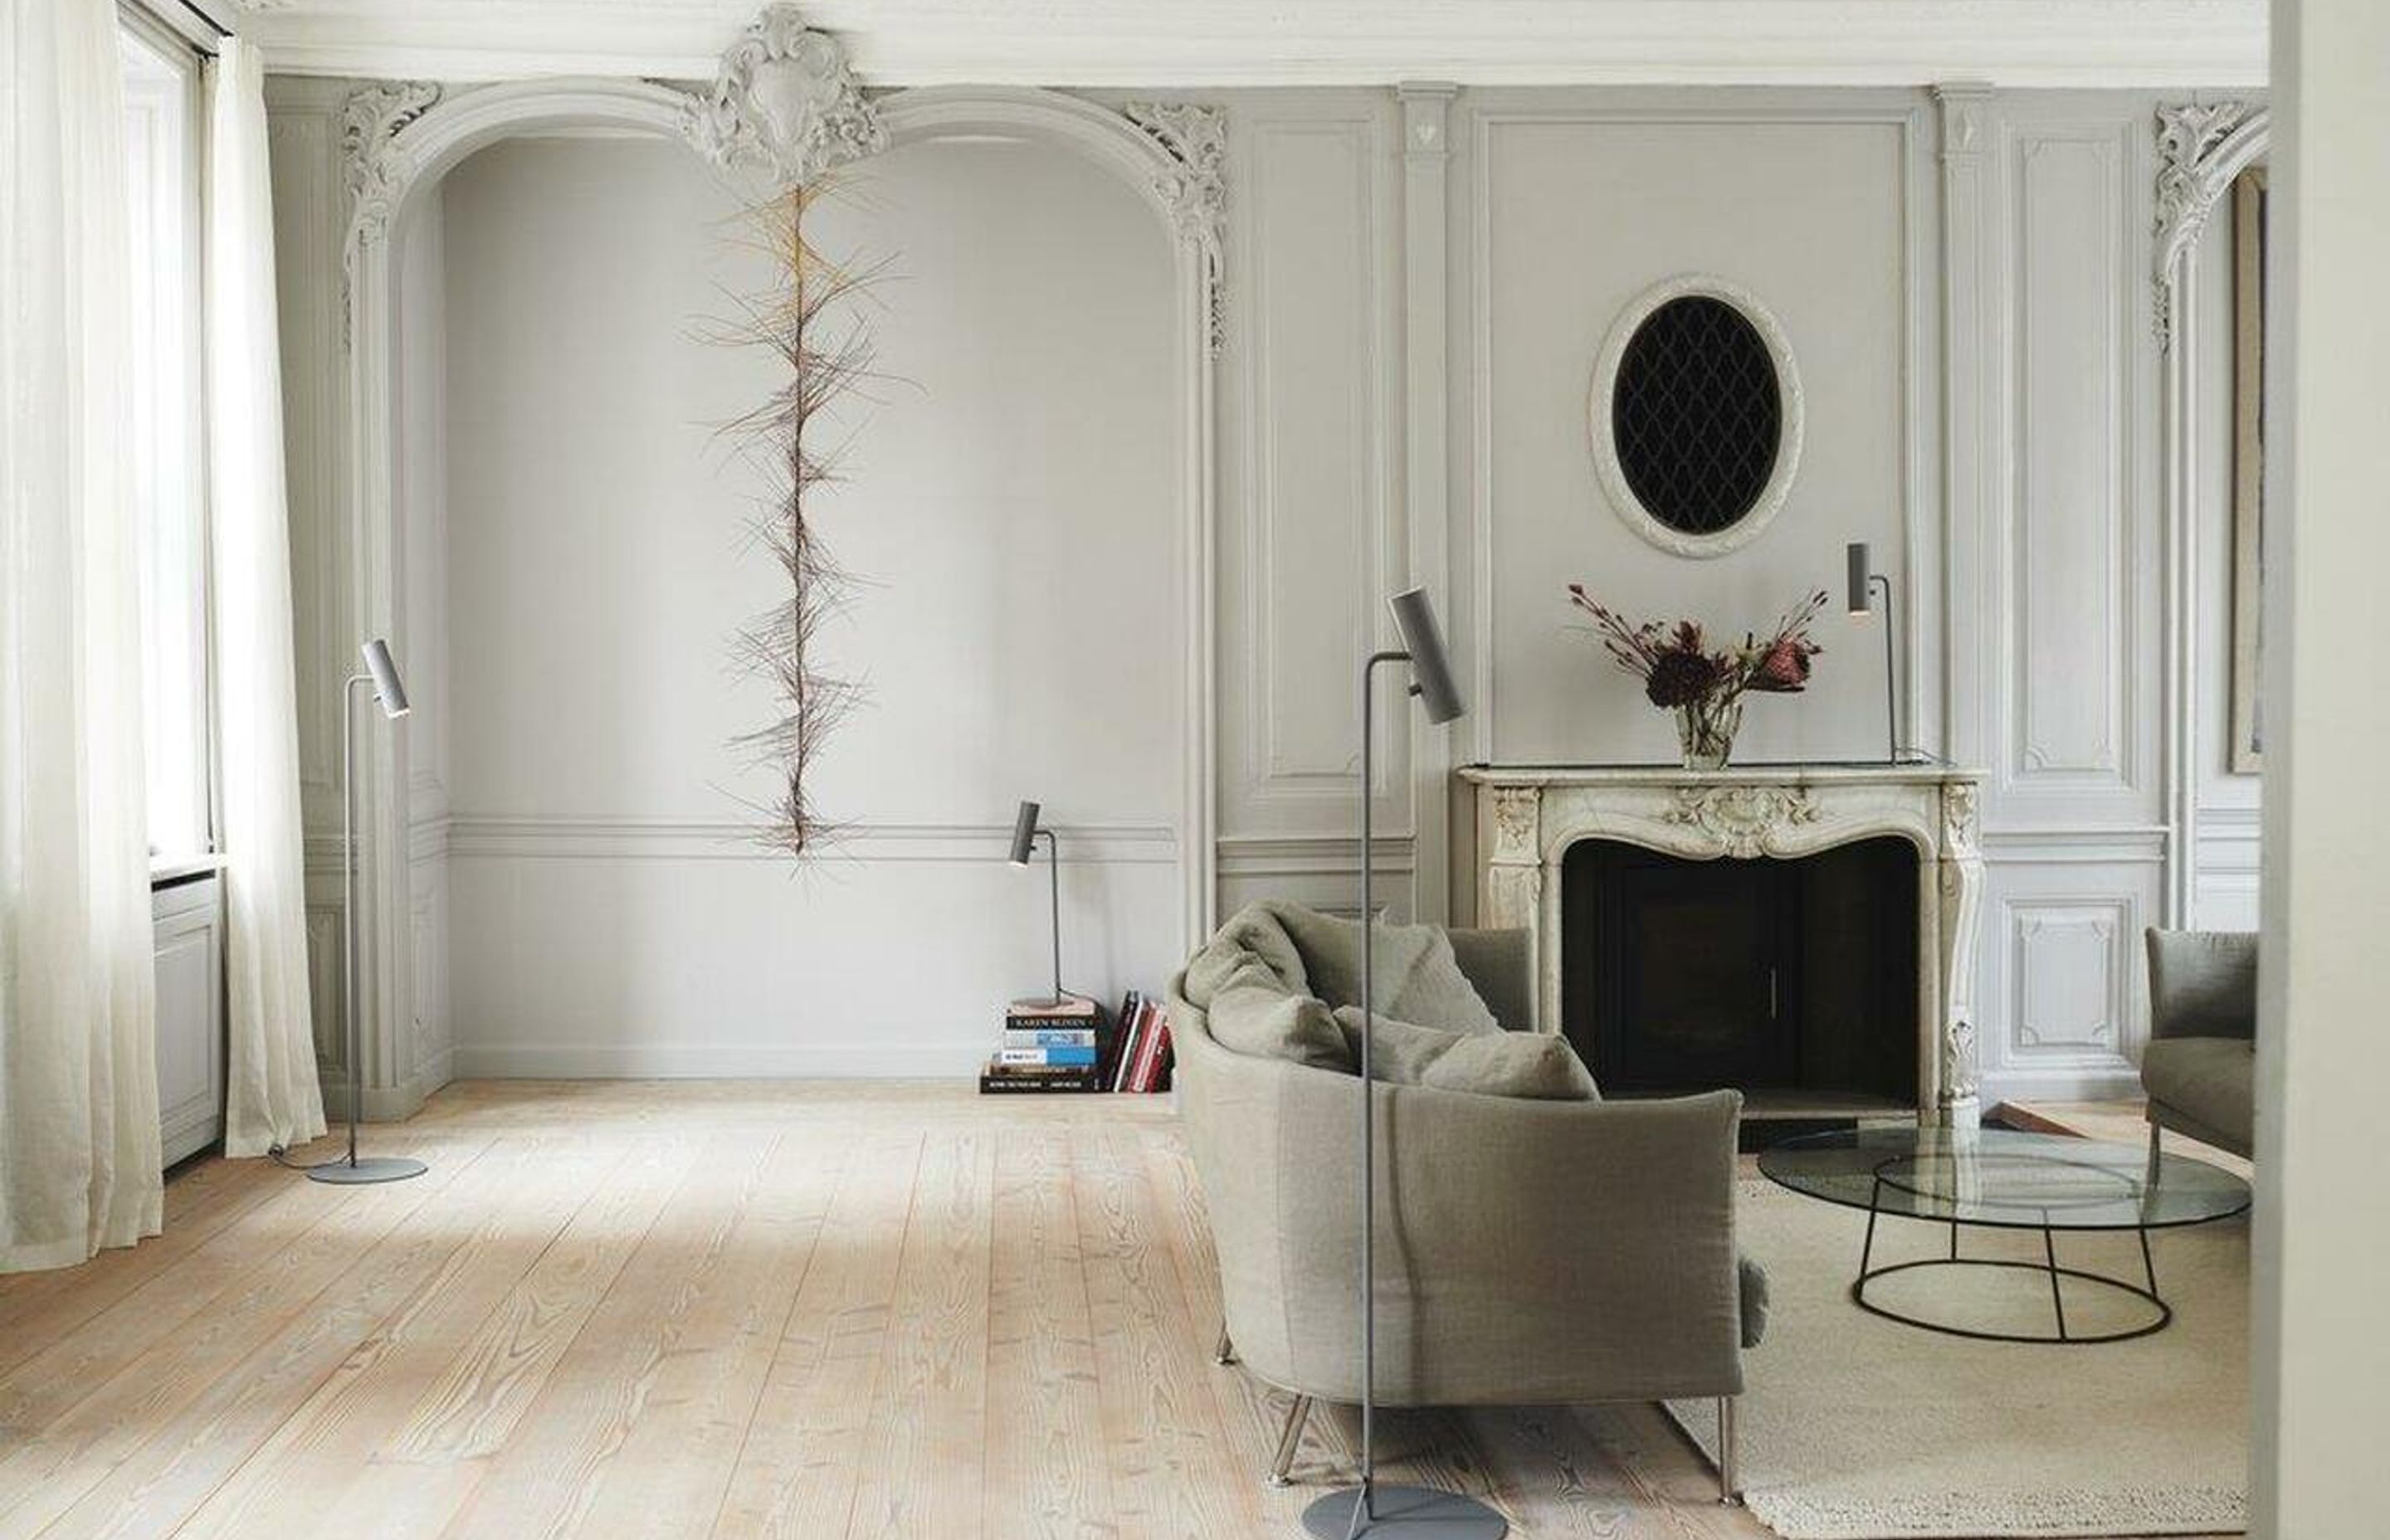 This Nordic, elegant Nordlux Mib6 floor light from Archilight is the perfect example of adding lamps to create a mood.